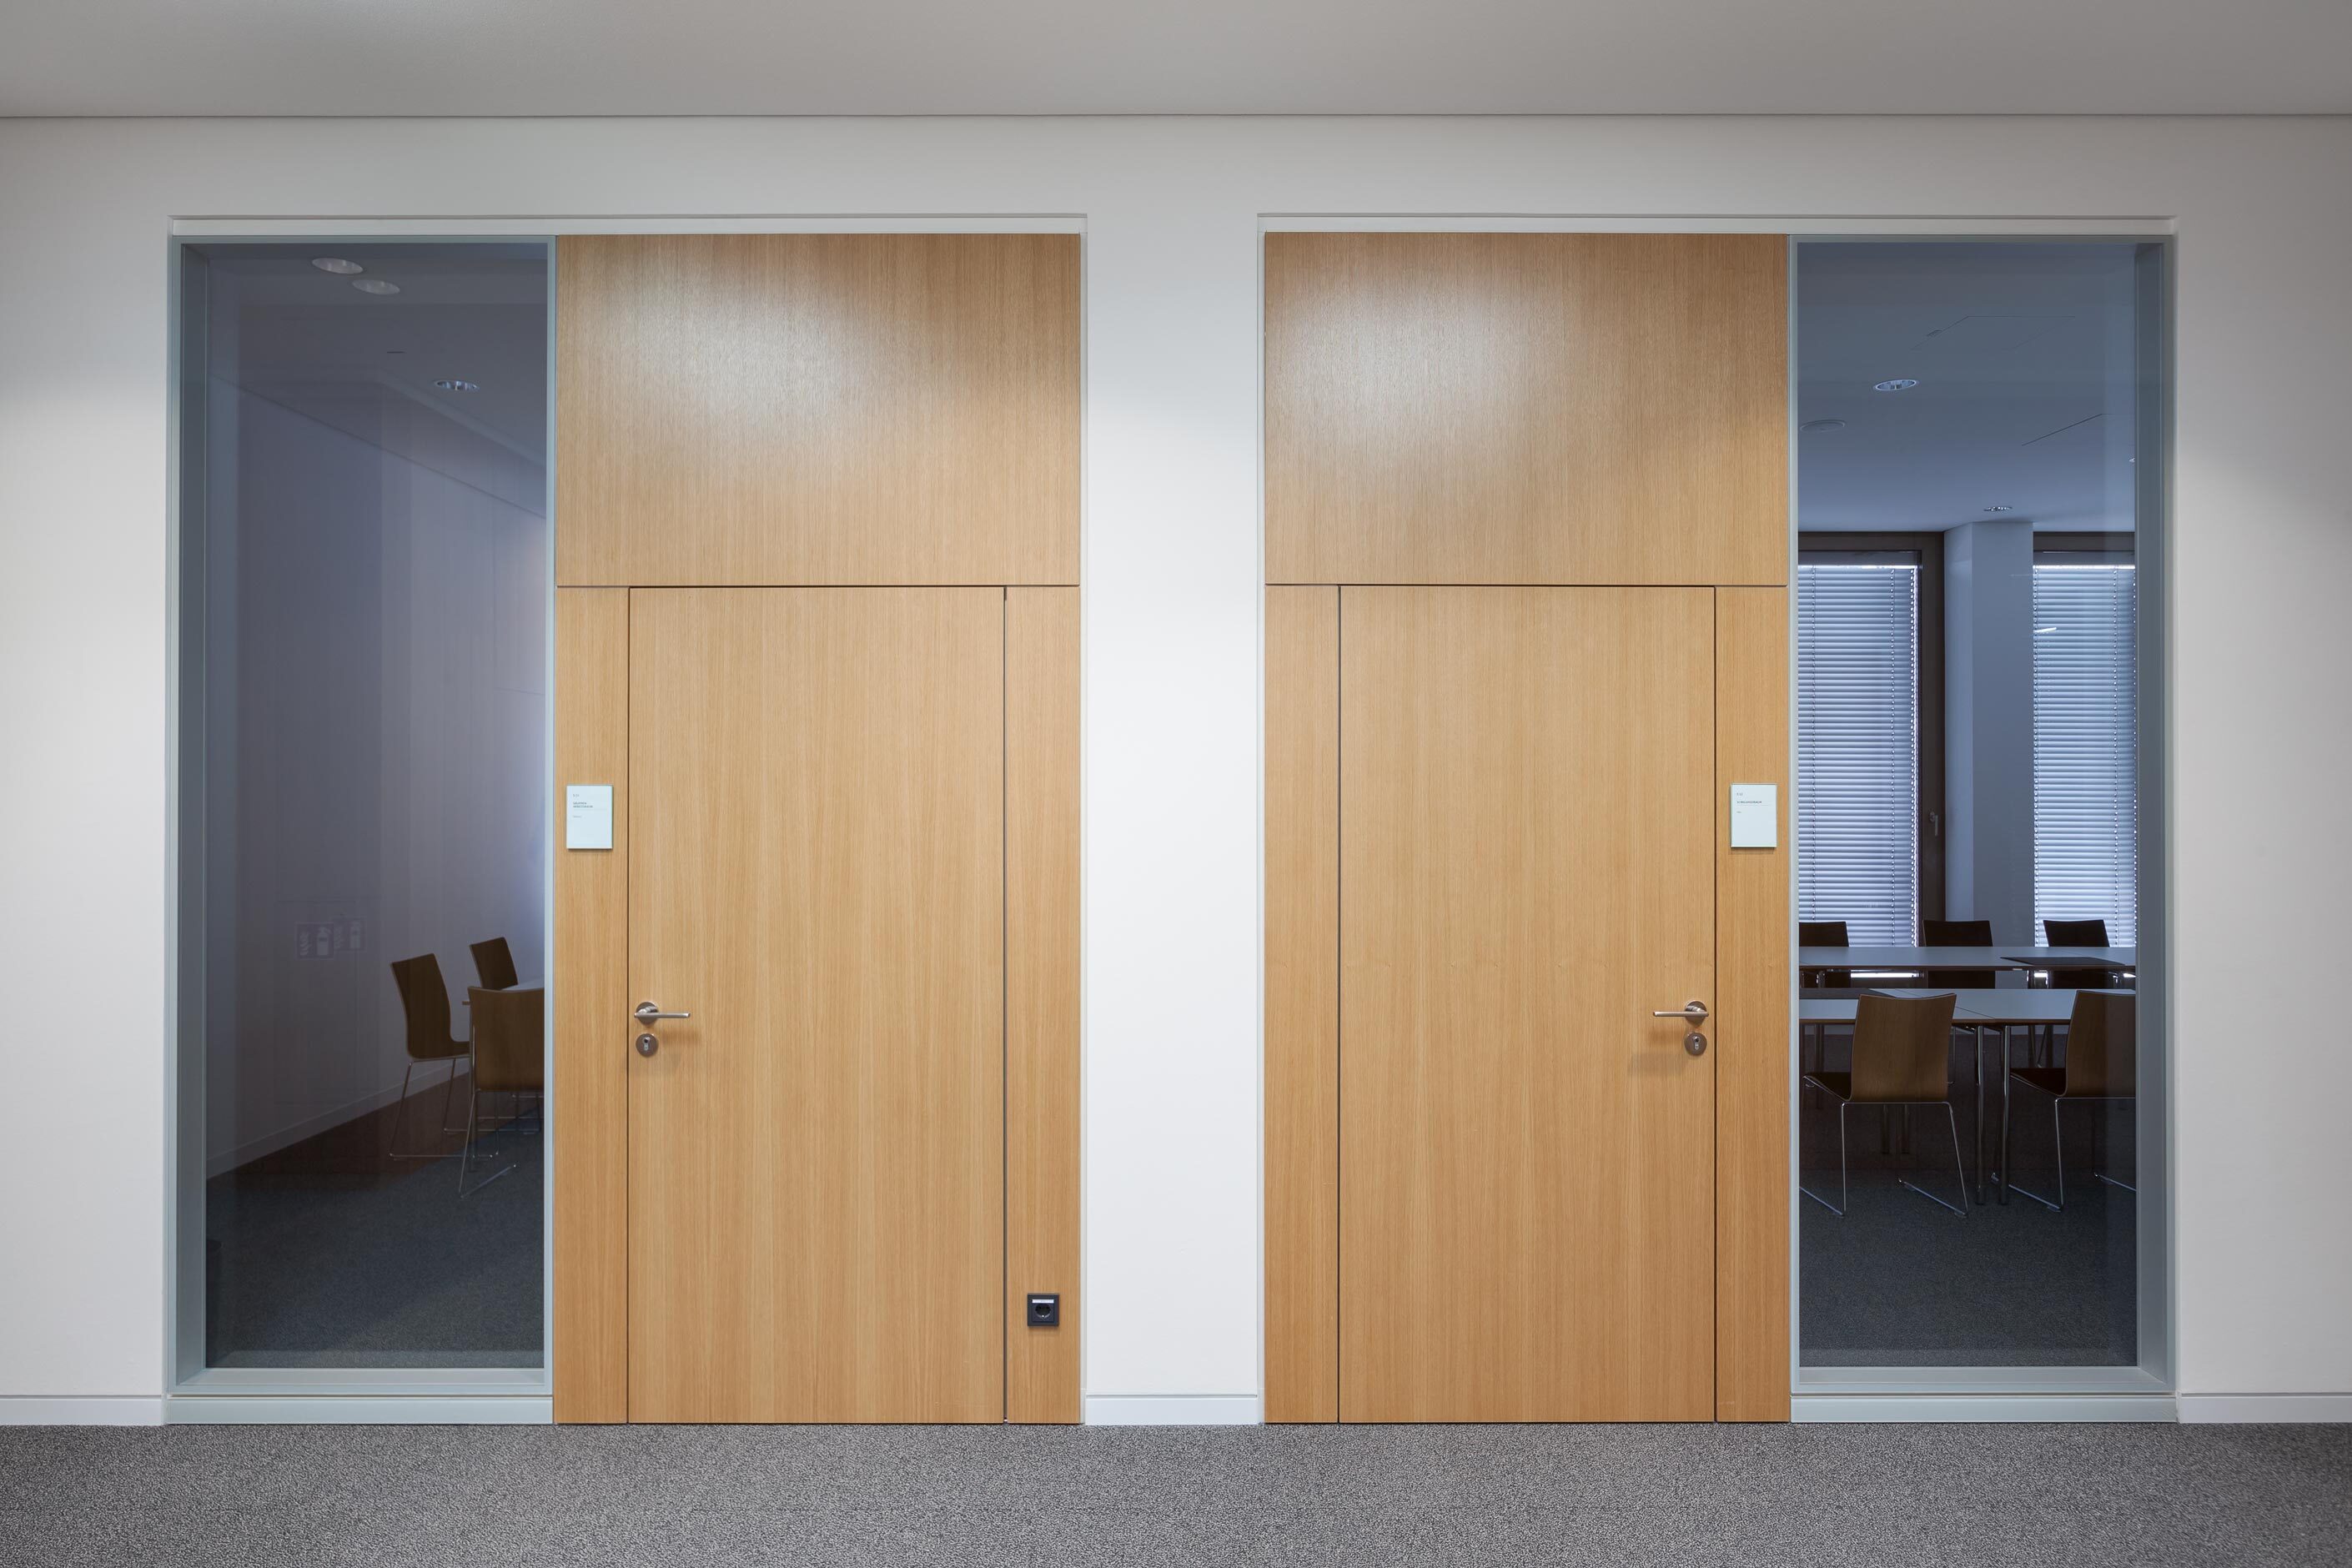 Sparkasse Ulm Haus 66 │ system walls from feco │ Flush H105 doors with concealed hinges